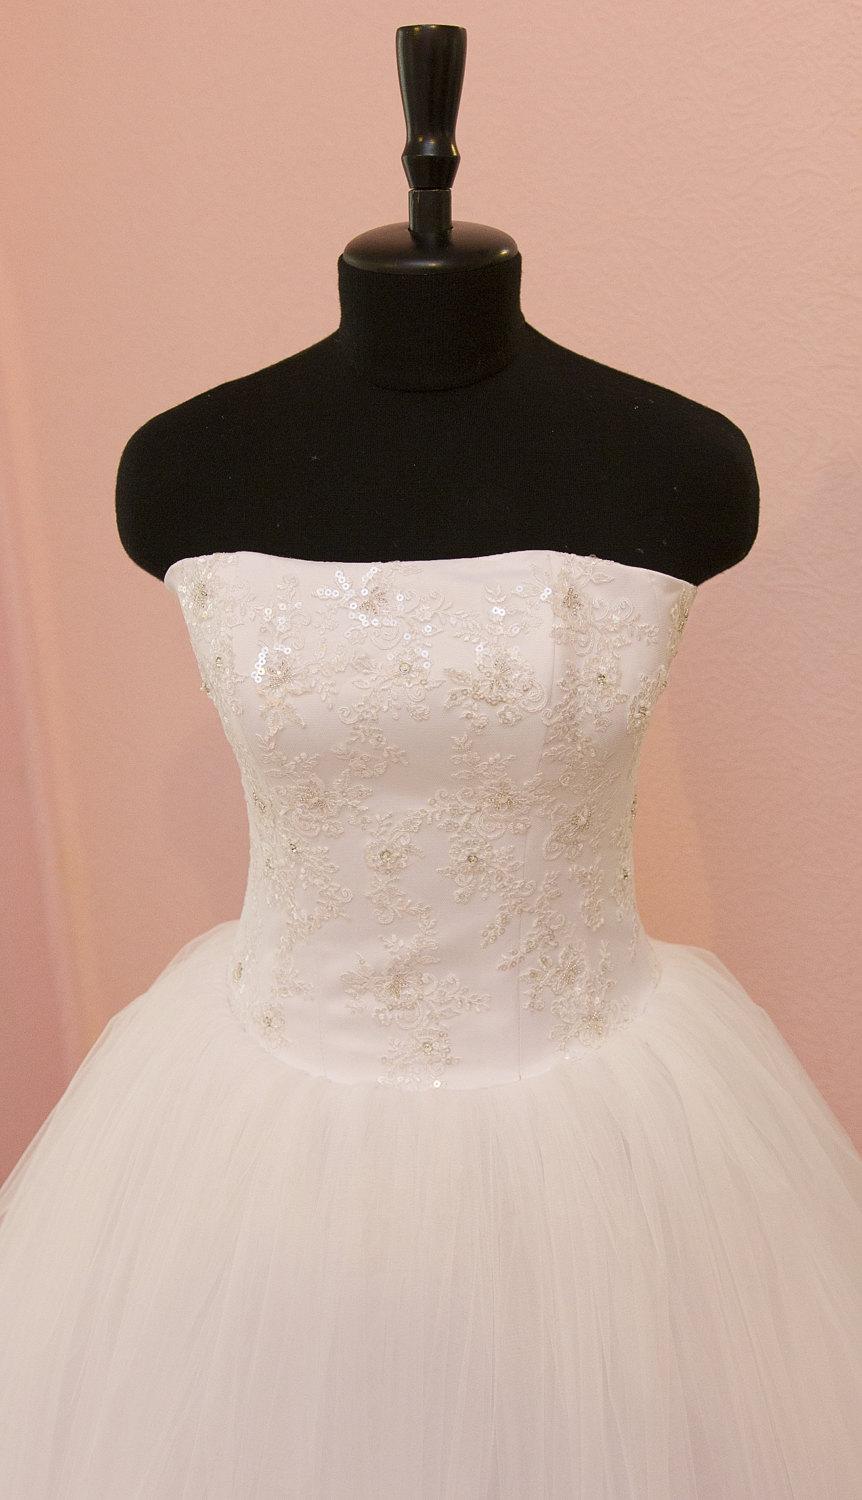 Hochzeit - Princess Ball Gown Light-As-Air Wedding Dress with Tulle Skirt and Lace Corset Embroidered with Swarovski Crystals and Sequins